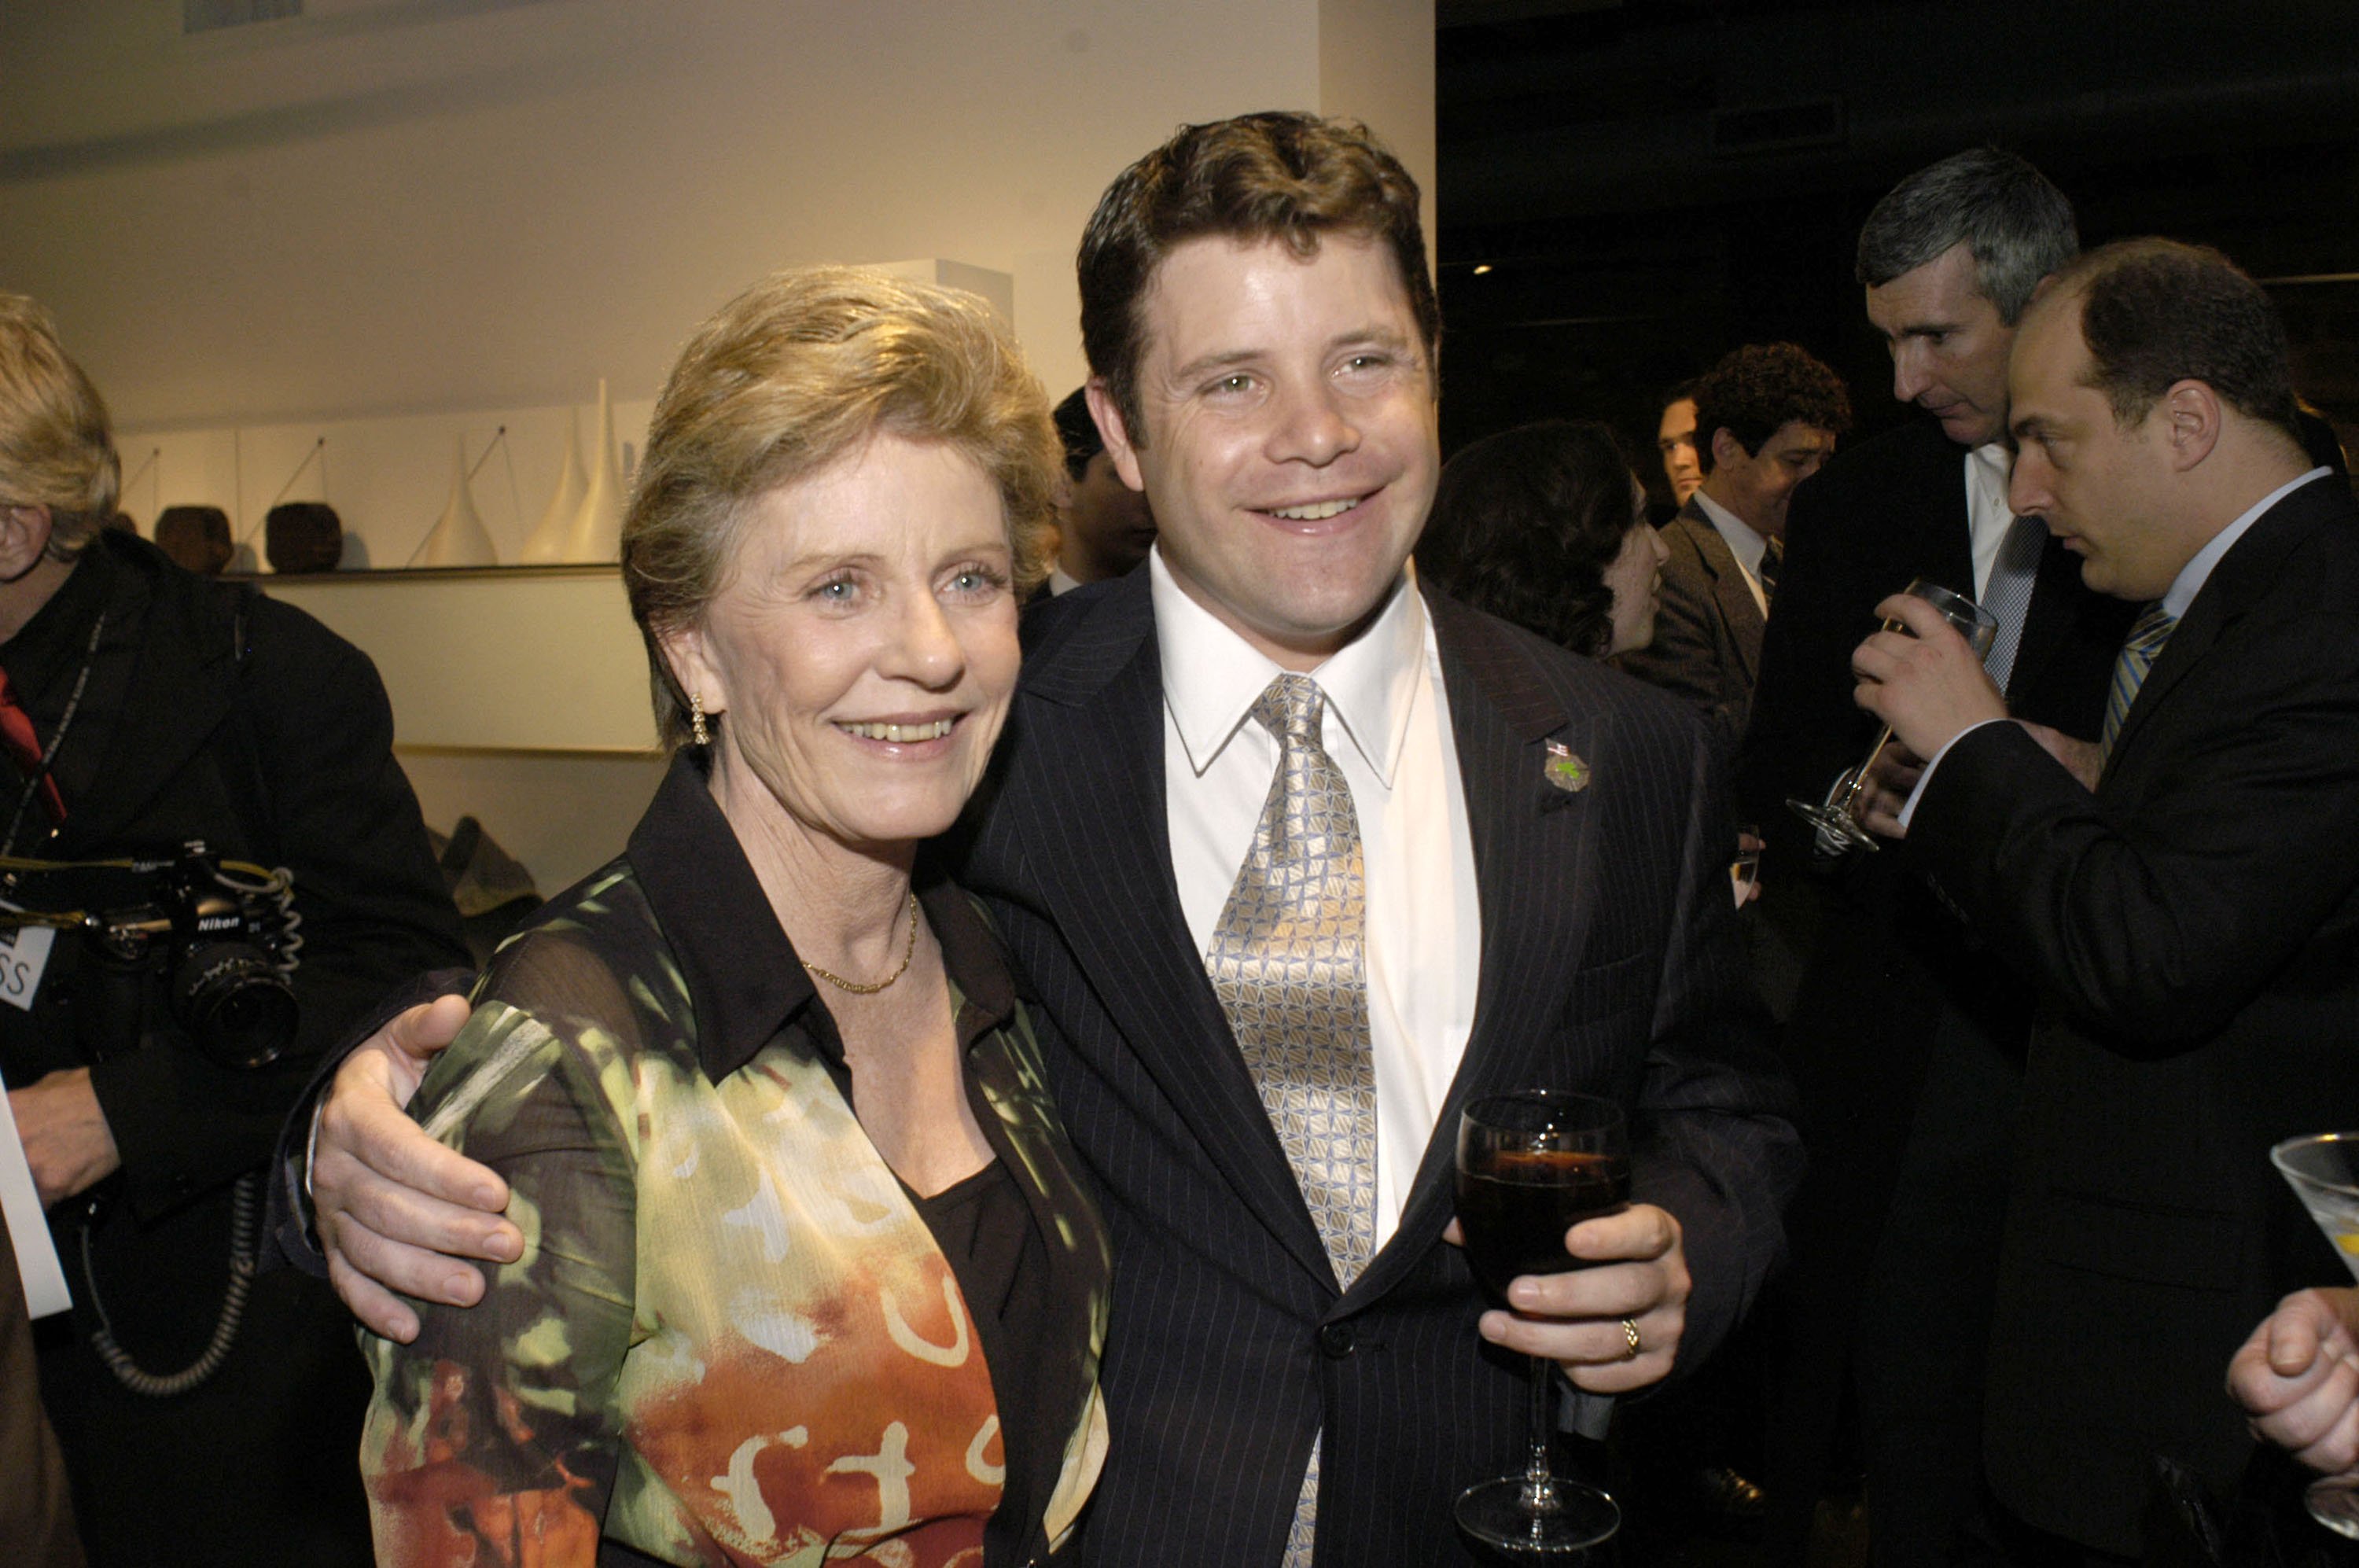 Patty Duke and her son, actor Sean Astin at the Creative Coalition's 2004 Capitol Hill Spotlight Awards ceremony on March 30, 2004, in Washington, DC. | Source: Getty Images